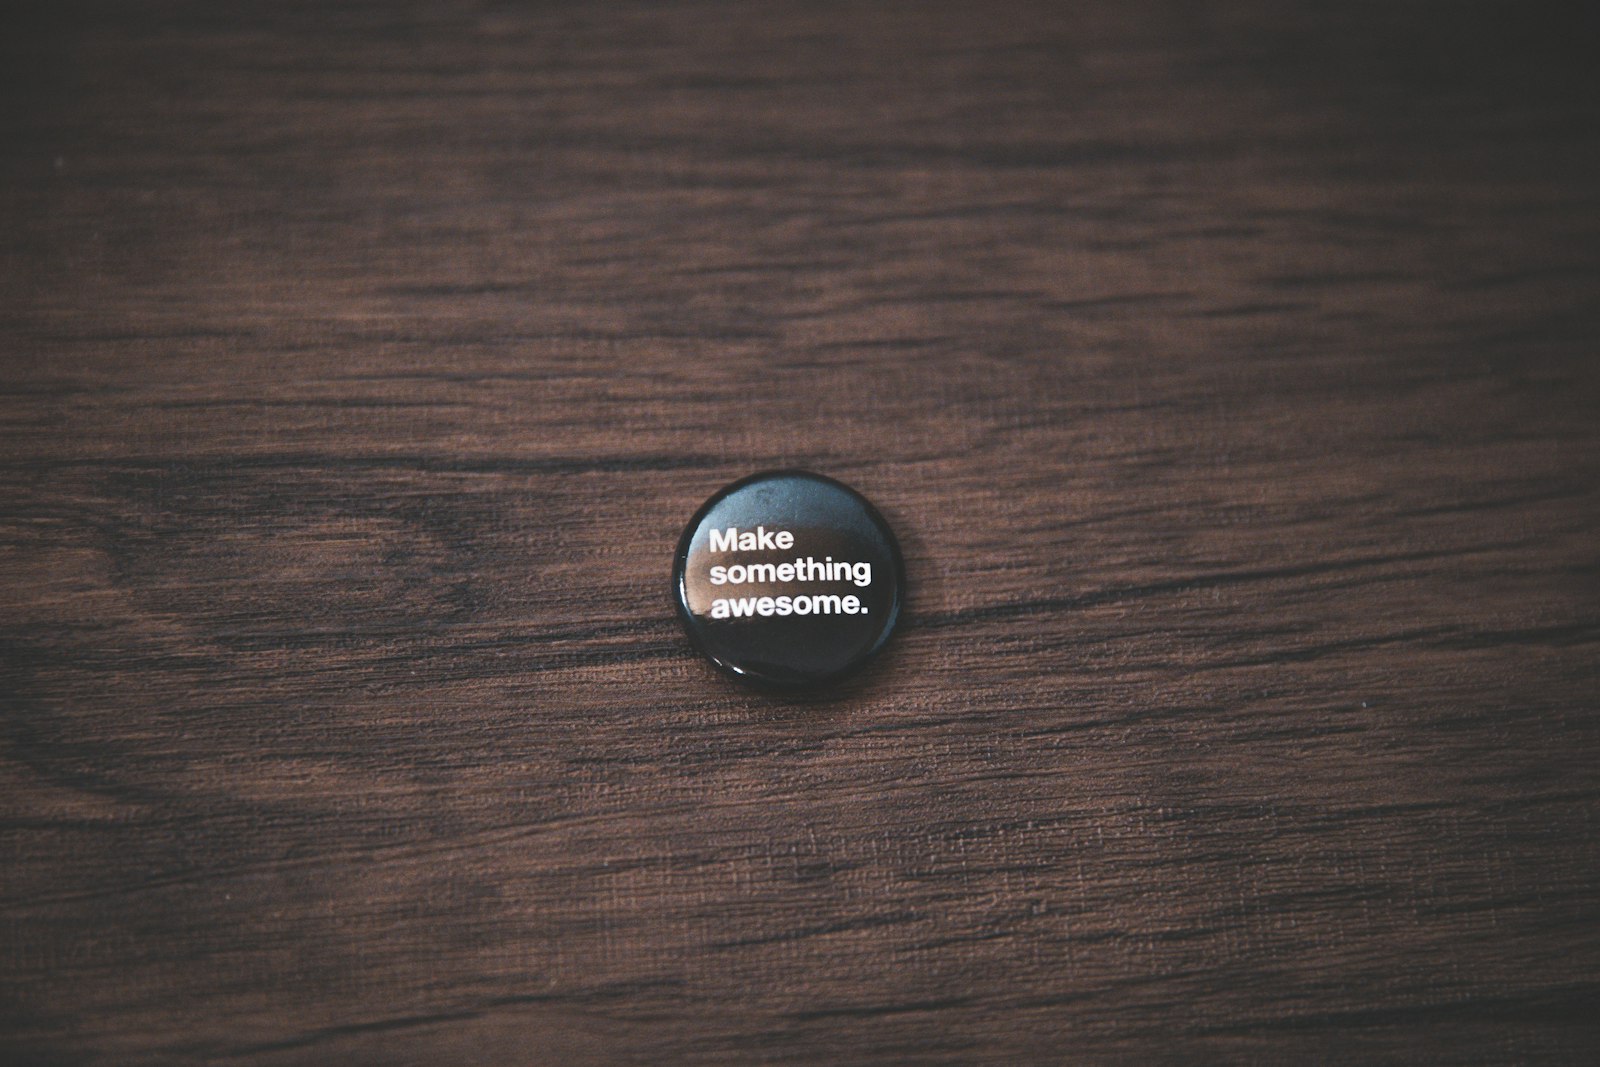 DT 0mm F0 SAM sample photo. Round printed button photography